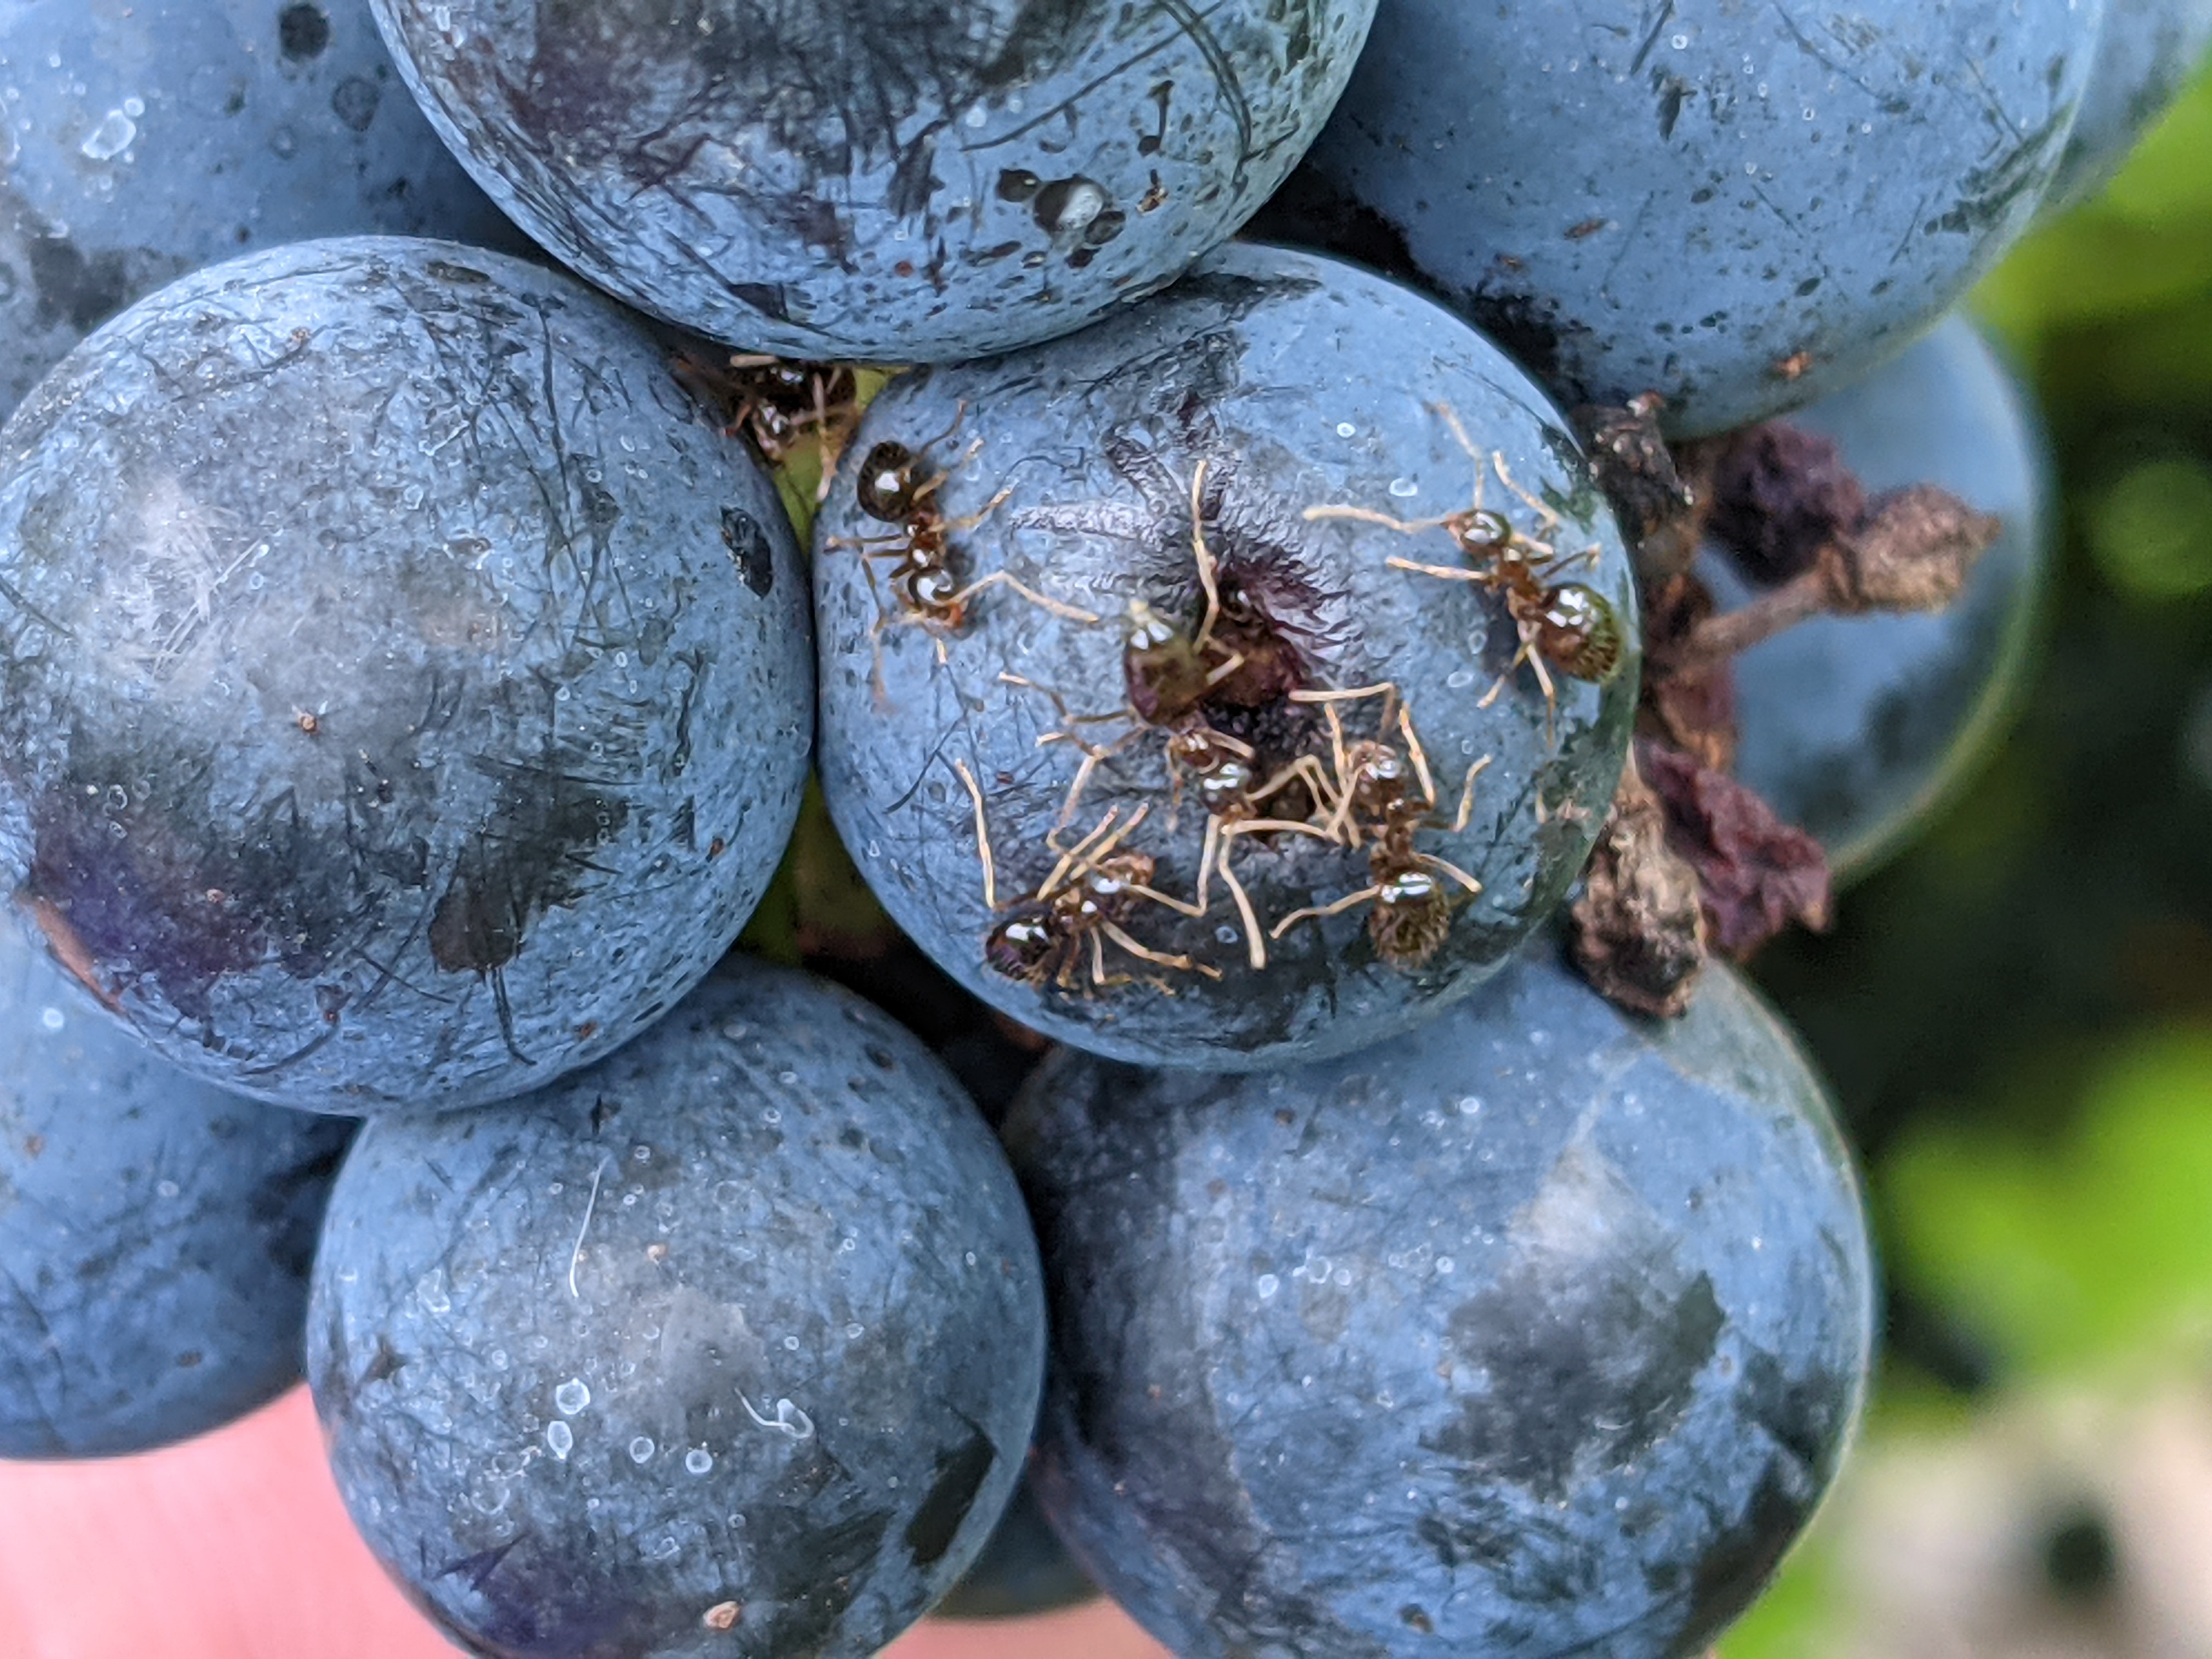 Ants on grapes.